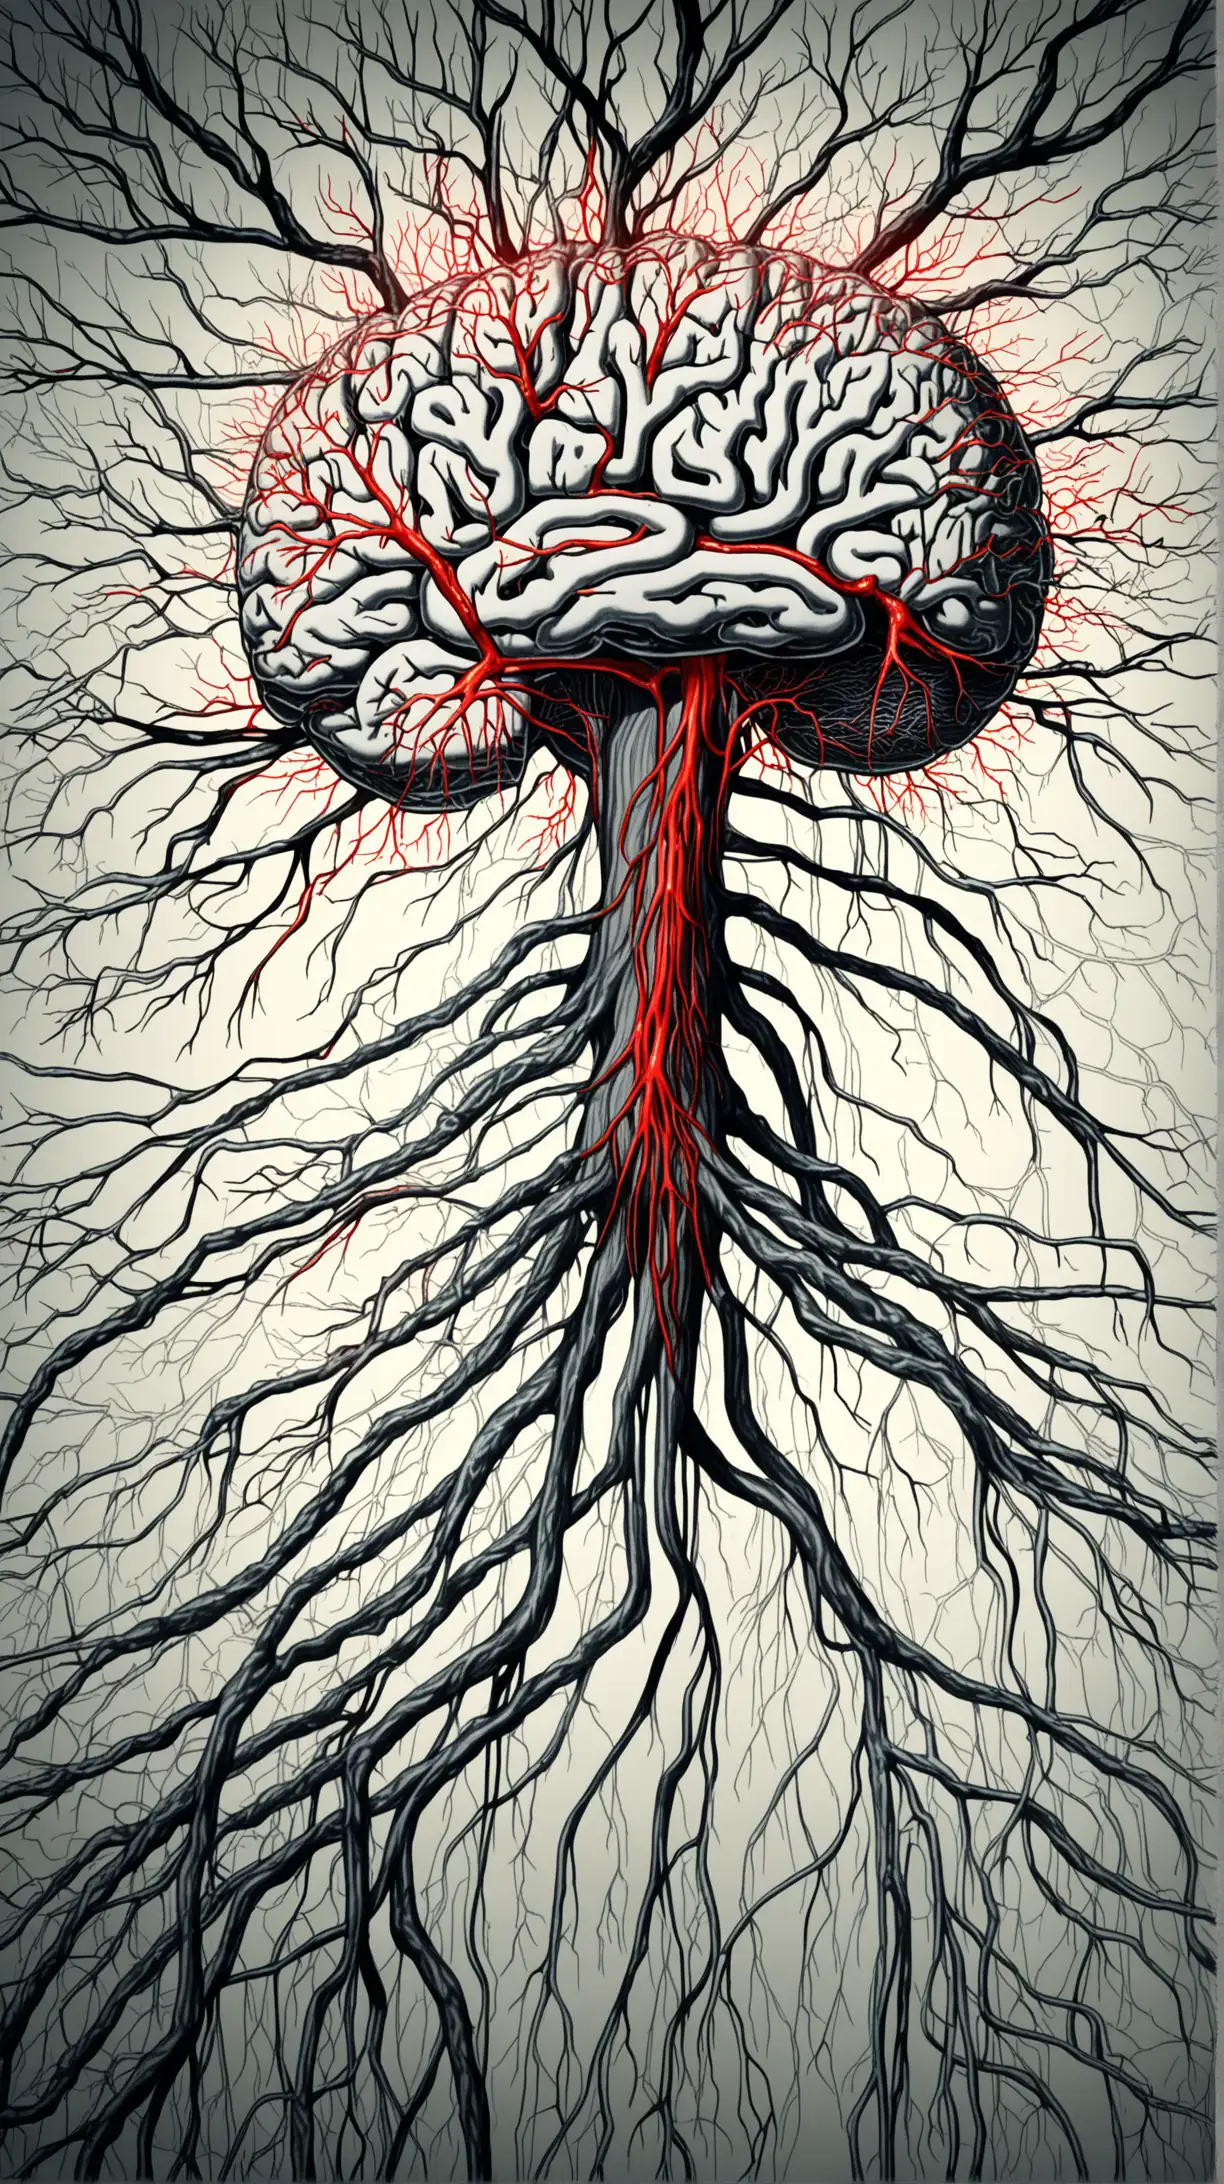 Illustration of Neuron Dendritic Monster on Branch with Nervous System Roots